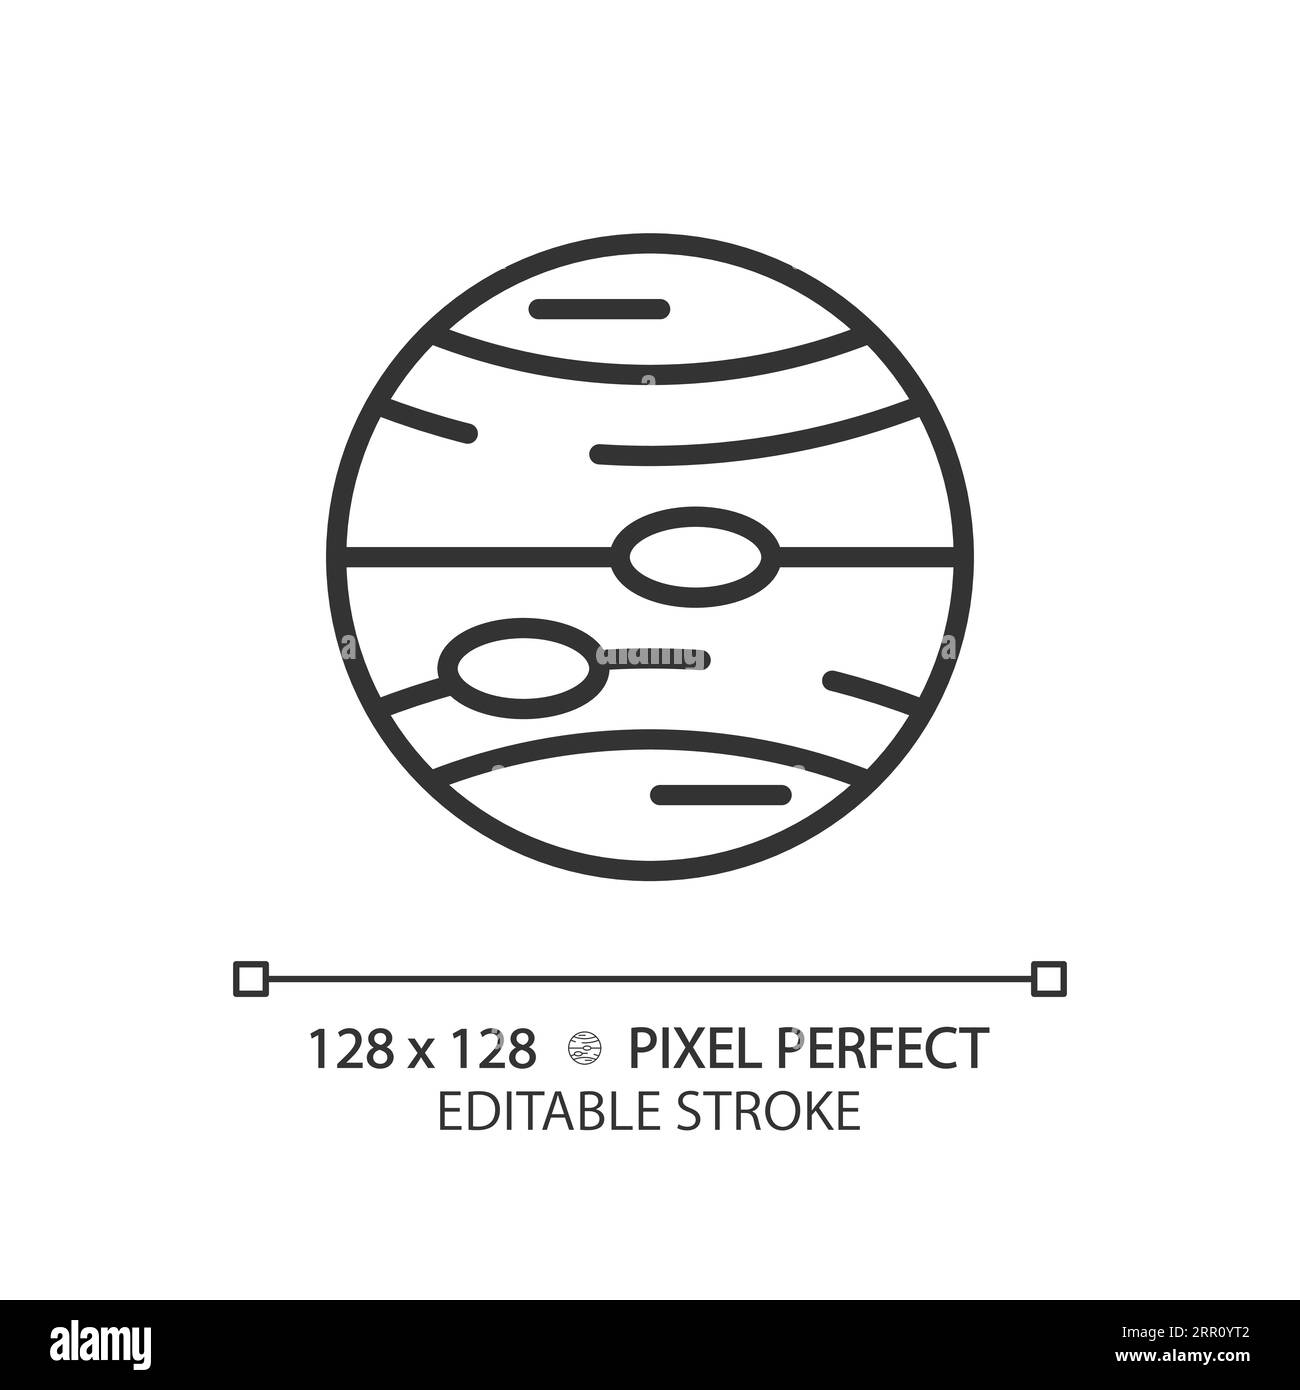 Jupiter pixel perfect linear icon Stock Vector